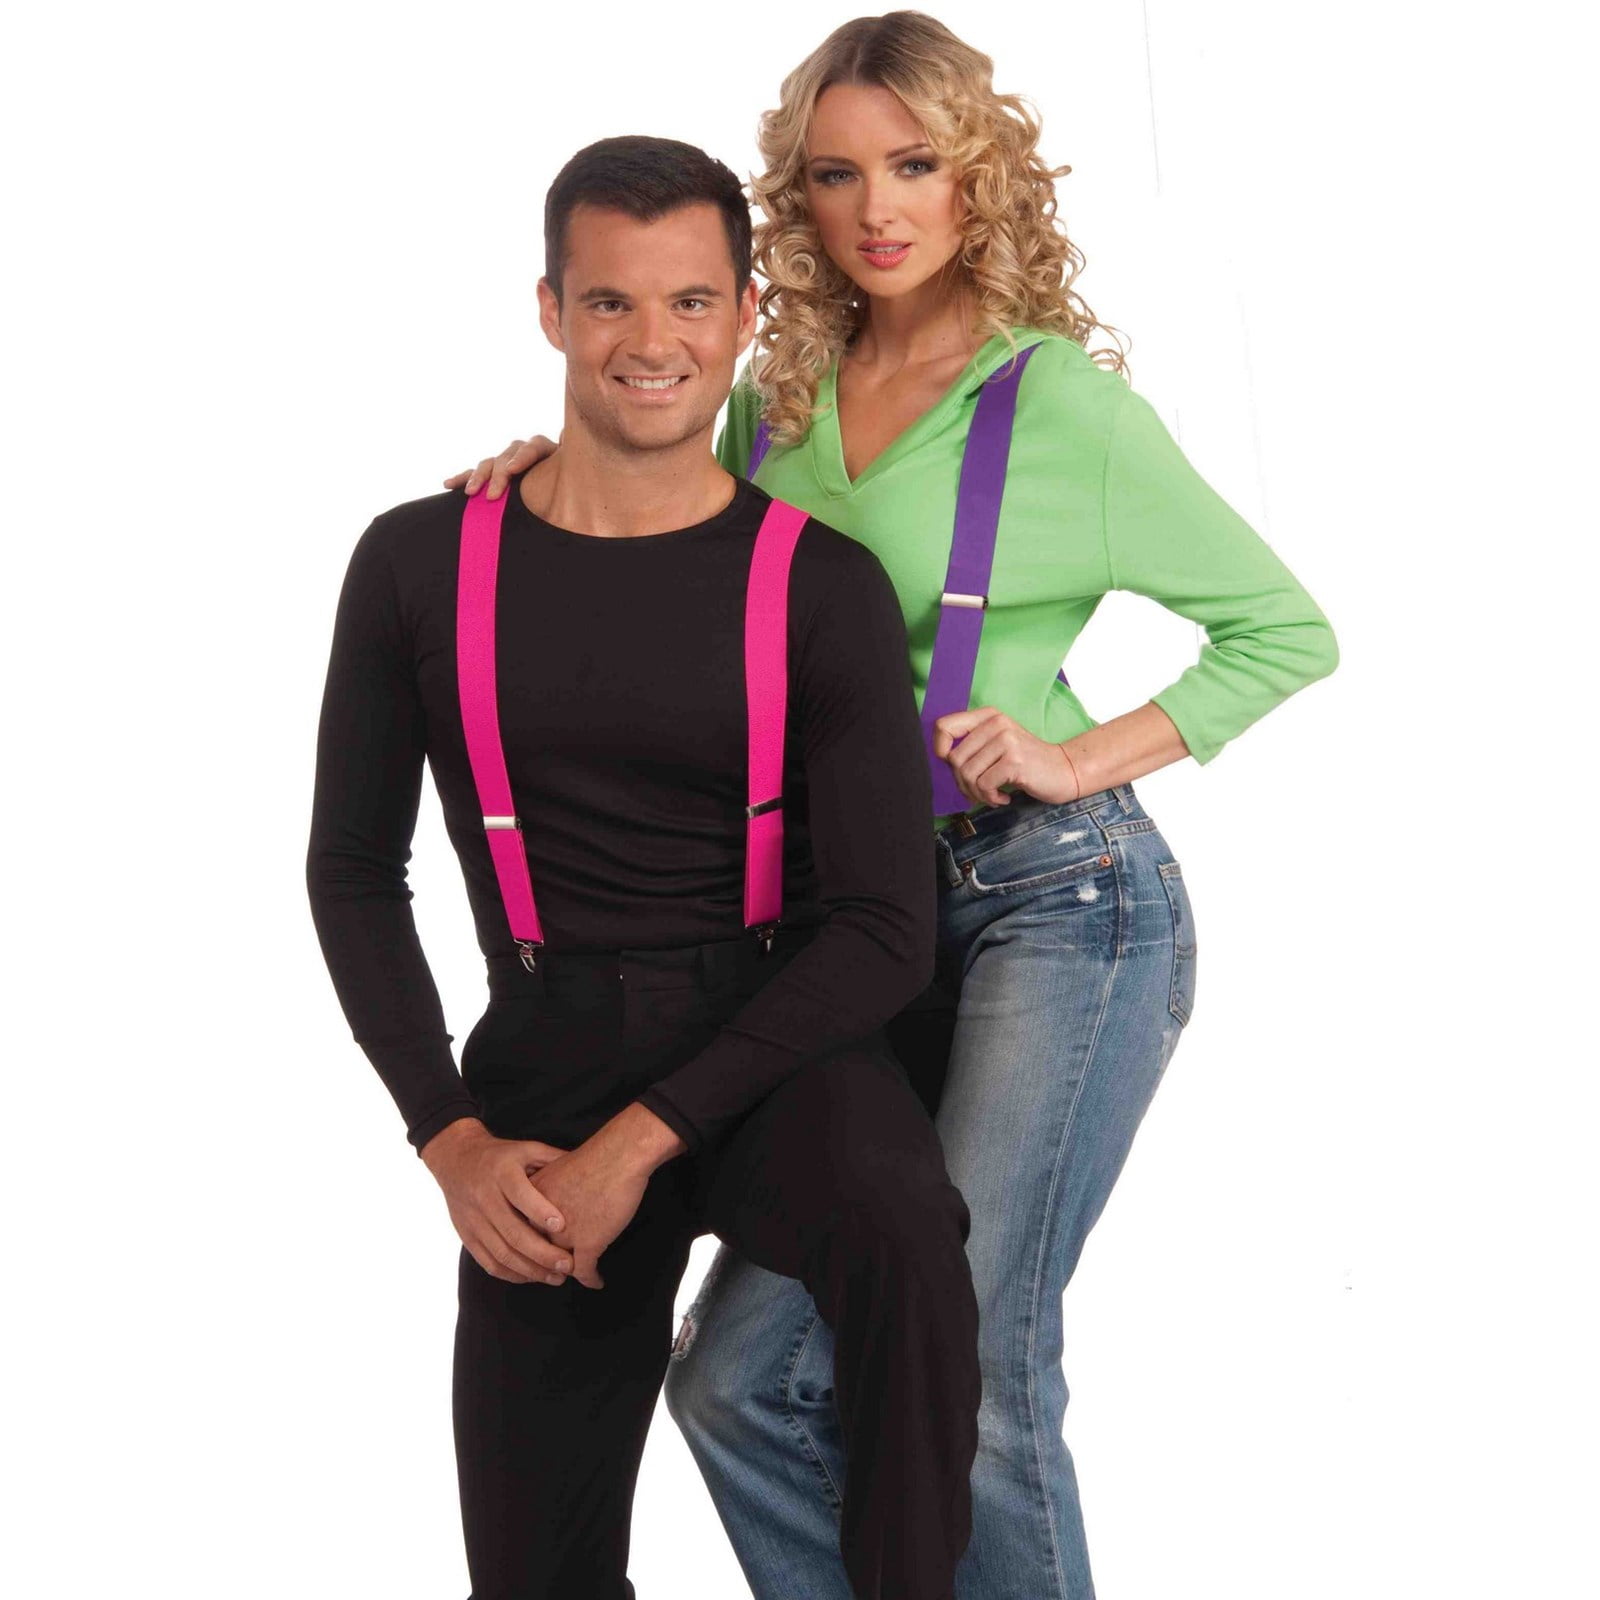 Black Suspenders X-back stretch teen adult costume tux style entertainer  formal